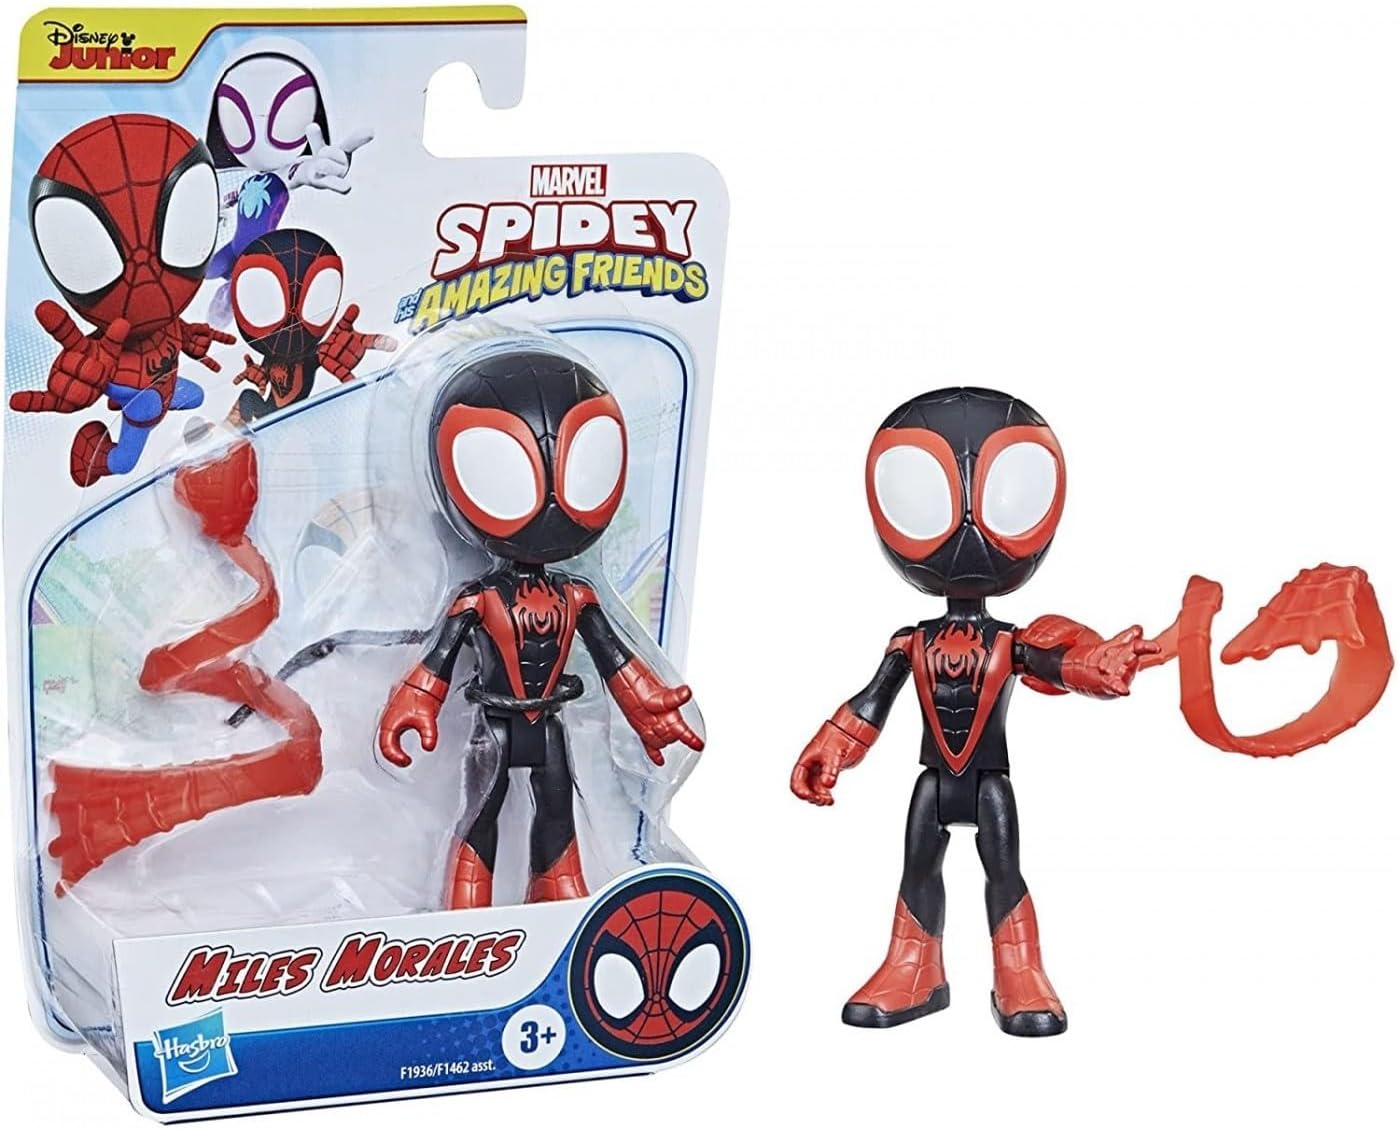 Spidey and his Amazing Friends Marvel Miles Morales Hero Figure, 4-Inch Scale Action Figure, Includes 1 Accessory.